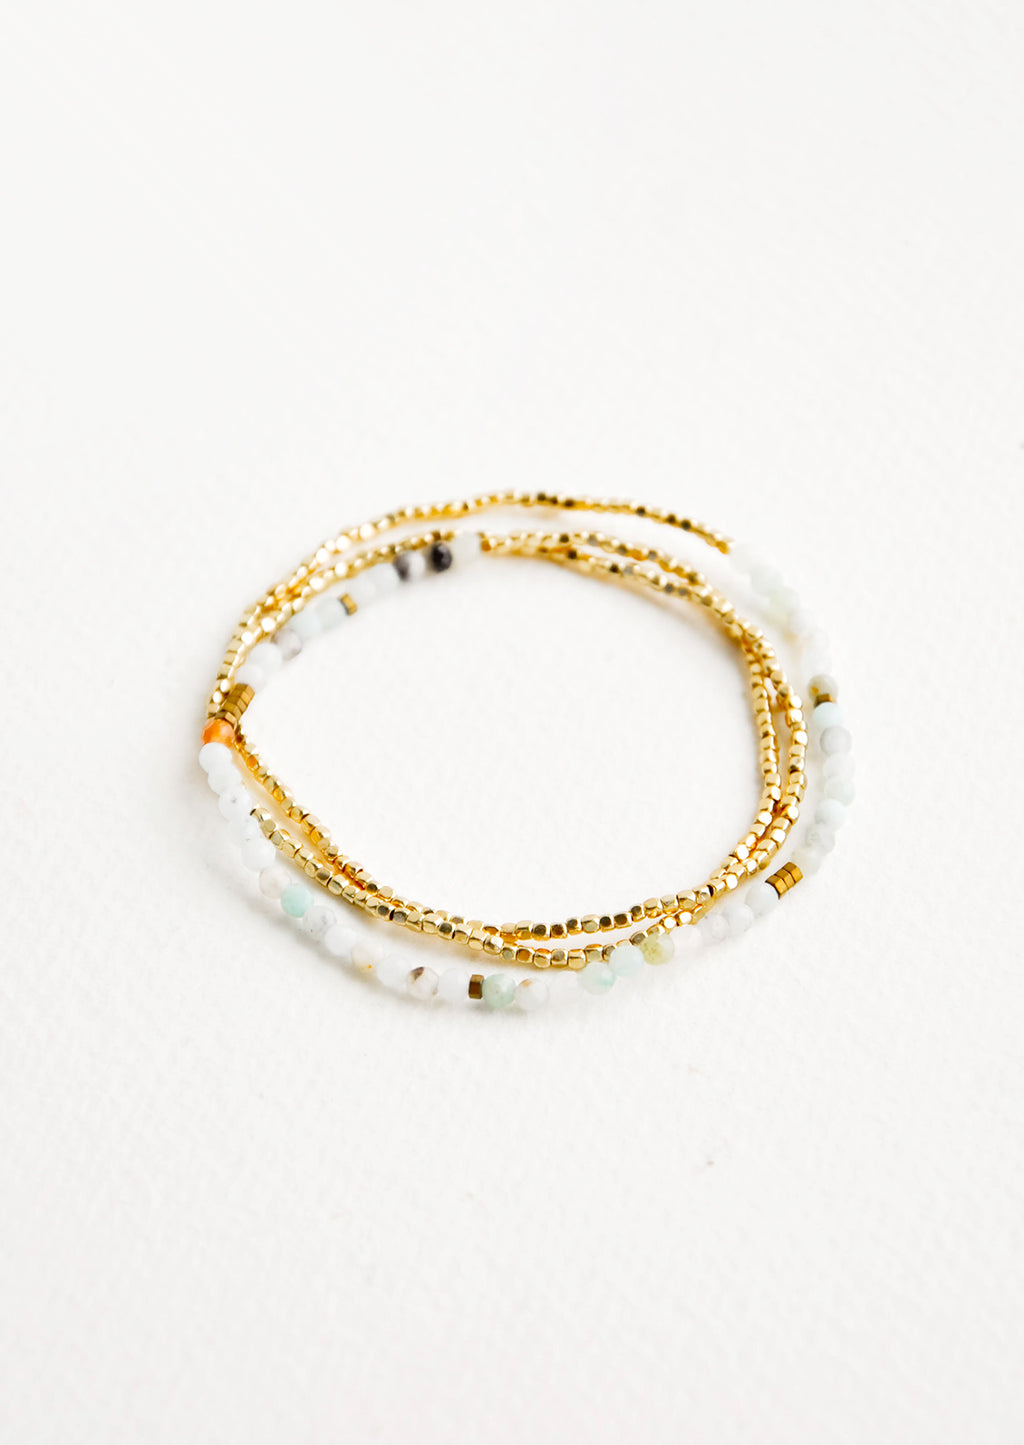 Amazonite: A single strand bracelet of gold and play green stone beads wrapped upon itself in three layers. 